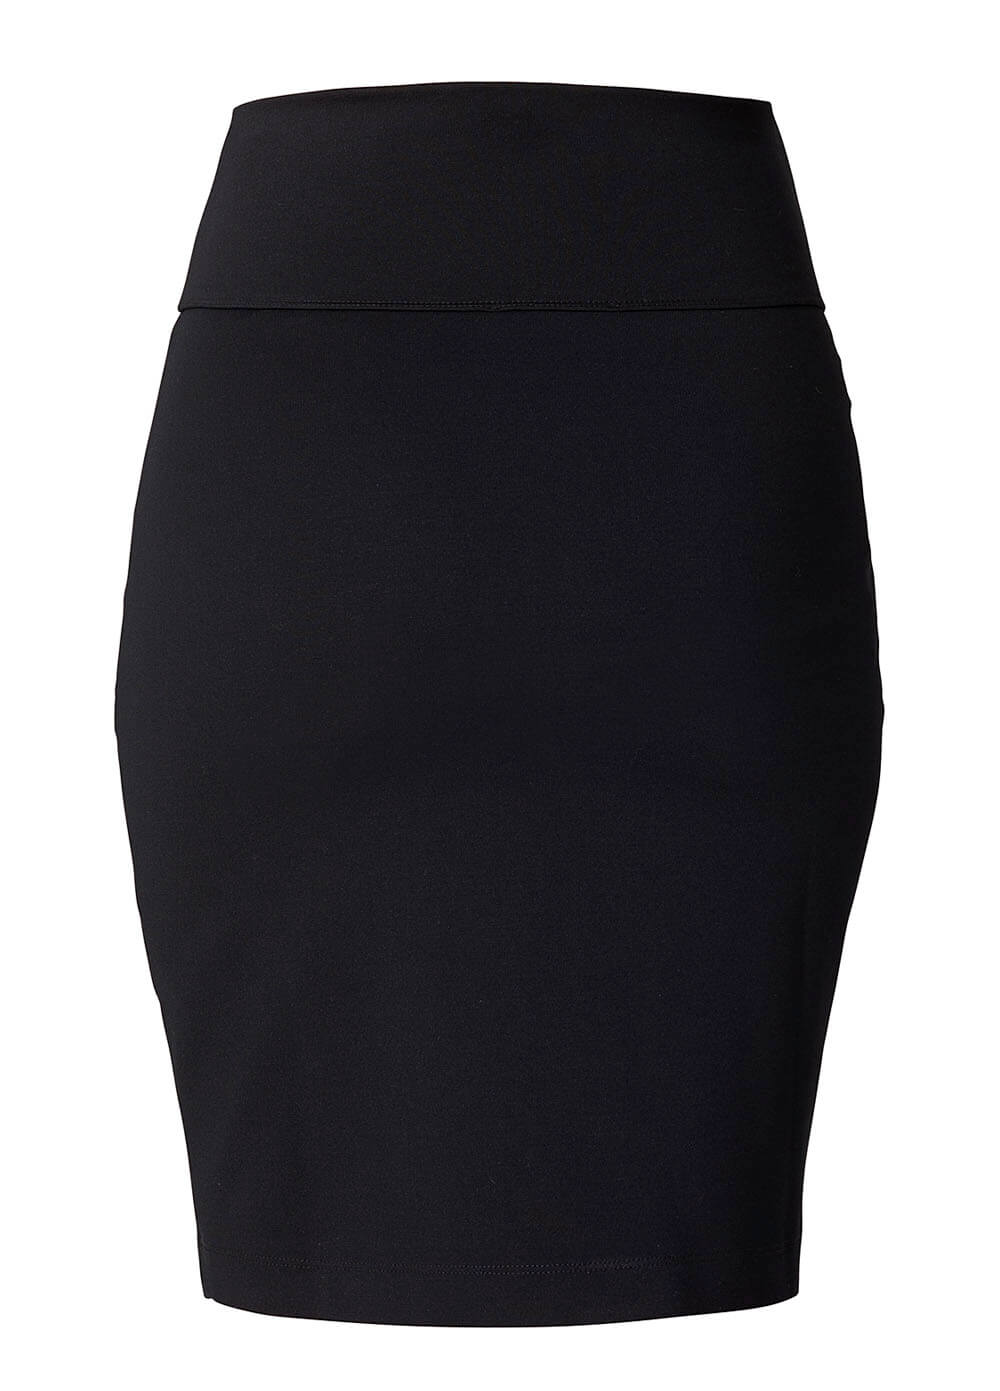 Black Ponte Maternity Pencil Skirt by Queen mum